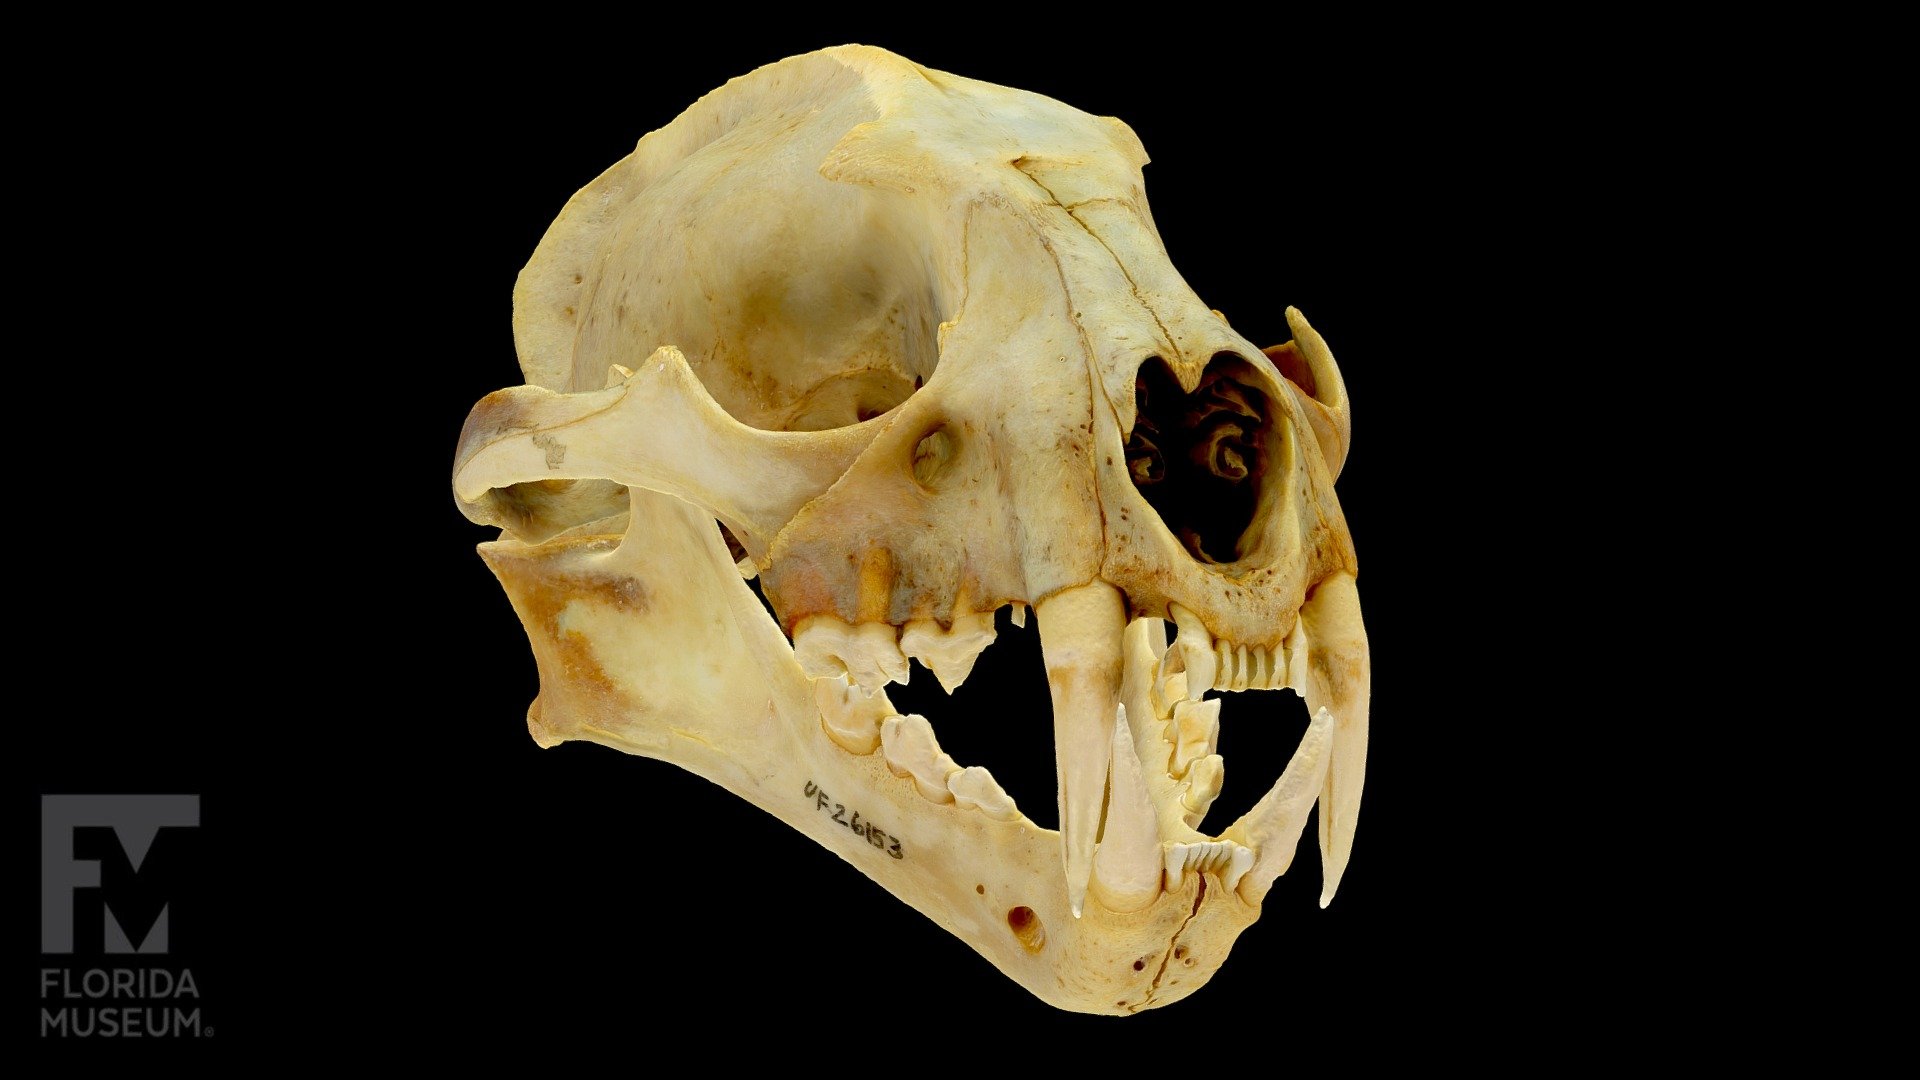 Skull and mandible of a clouded leopard, Neofelis nebulosa from the Florida Museum of Natural History Mammal collection (UF 26153).

Photogrammetry scan by the Florida Museum Digital Imaging division: https://www.floridamuseum.ufl.edu/digital-lab/photogrammetry/

Florida Museum Mammalogy page: https://www.floridamuseum.ufl.edu/mammals/

Scanning and modelling funded by the oVert TCN project at the University of Florida (NSF DBI-1701714): https://tinyurl.com/oVertwiki.

Unit of measurement = meter - Clouded Leopard Skull and Mandible (UF 26153) - 3D model by FloridaMuseum 3d model